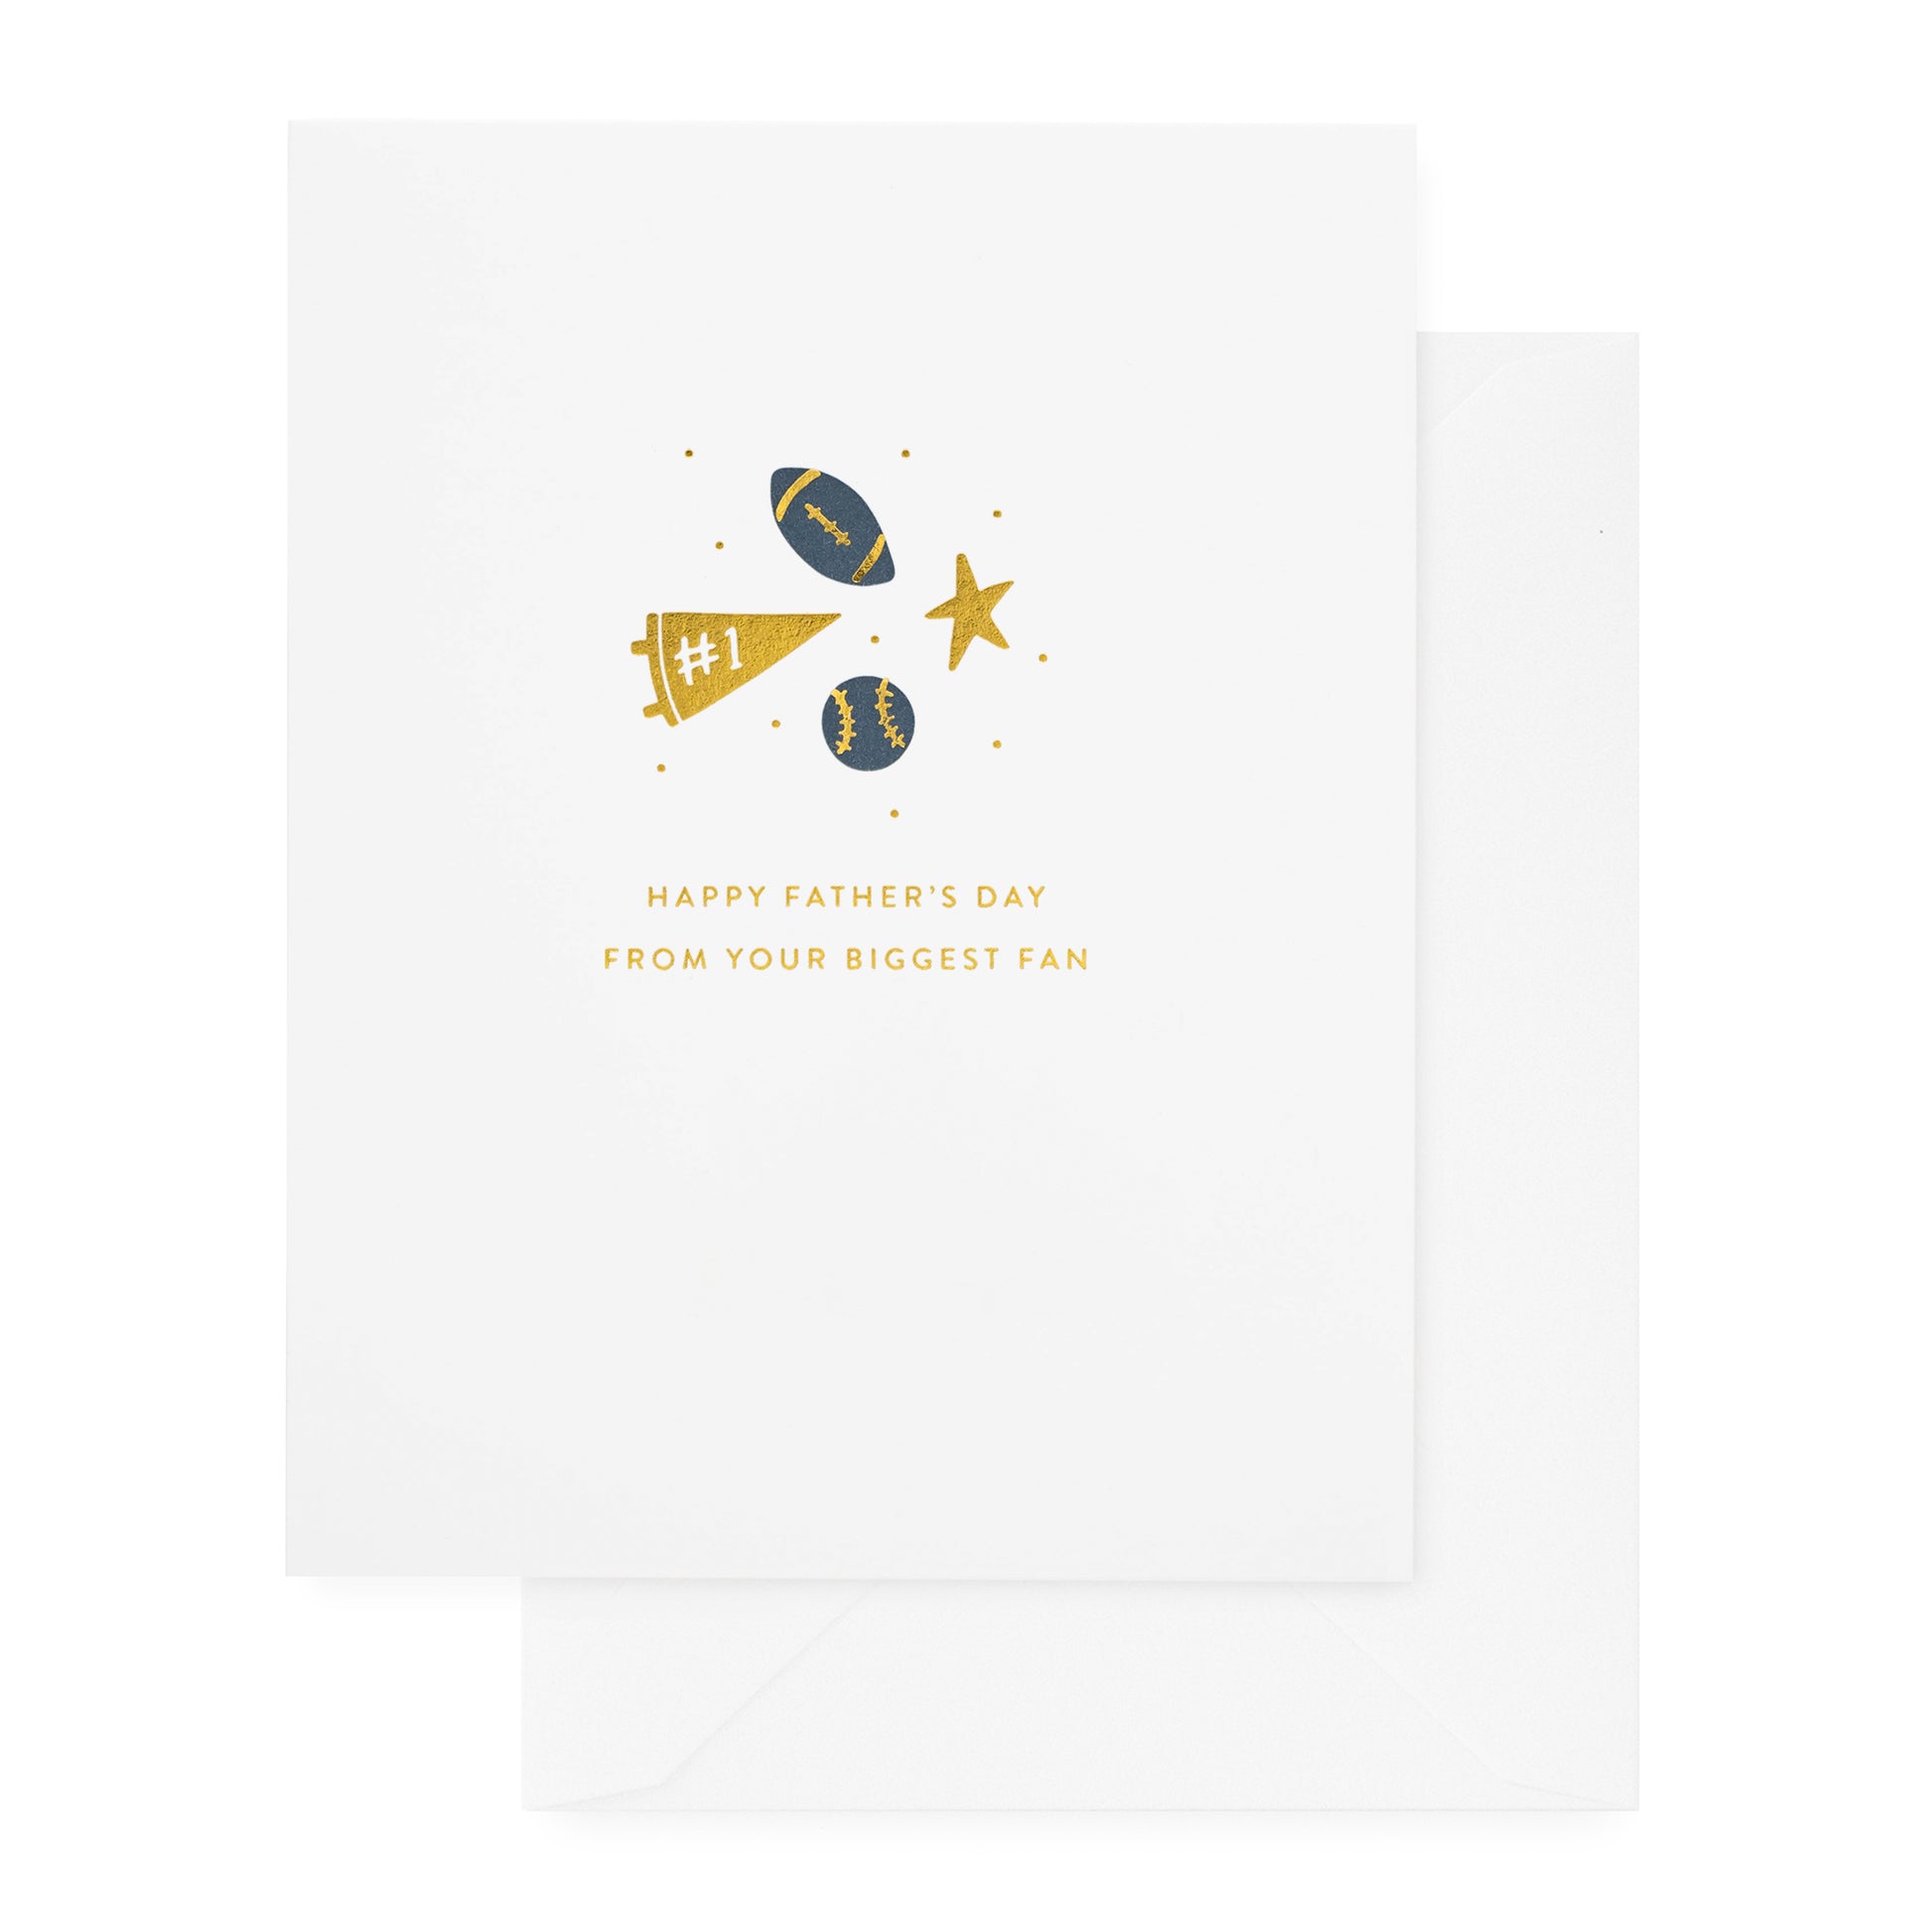 White card printed with gold foil and blue icons printed with happy father's day from your biggest fan